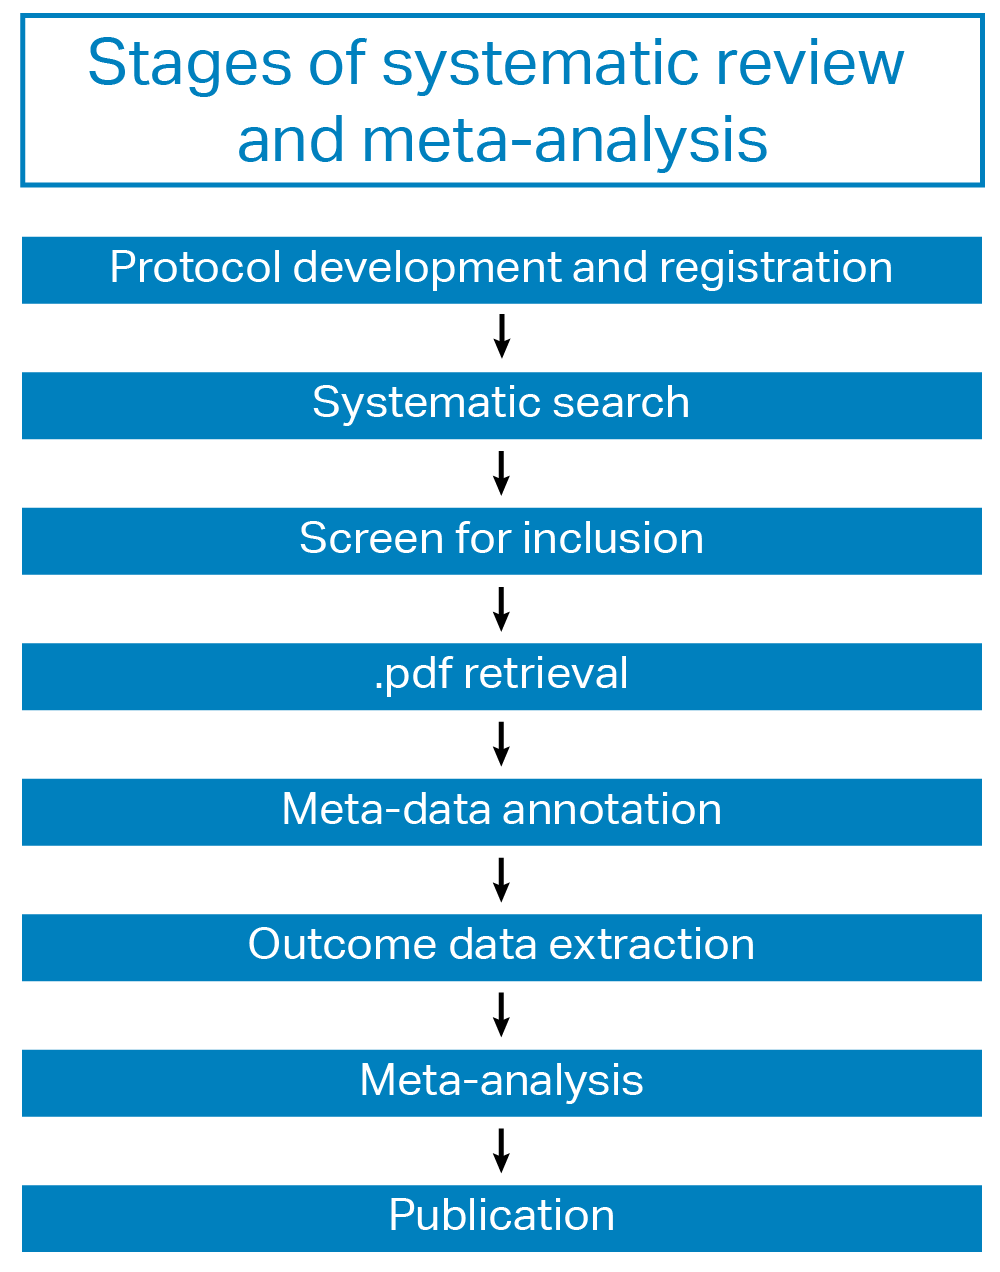 A flow chart showing the stages of a systematic review, from beginning to end